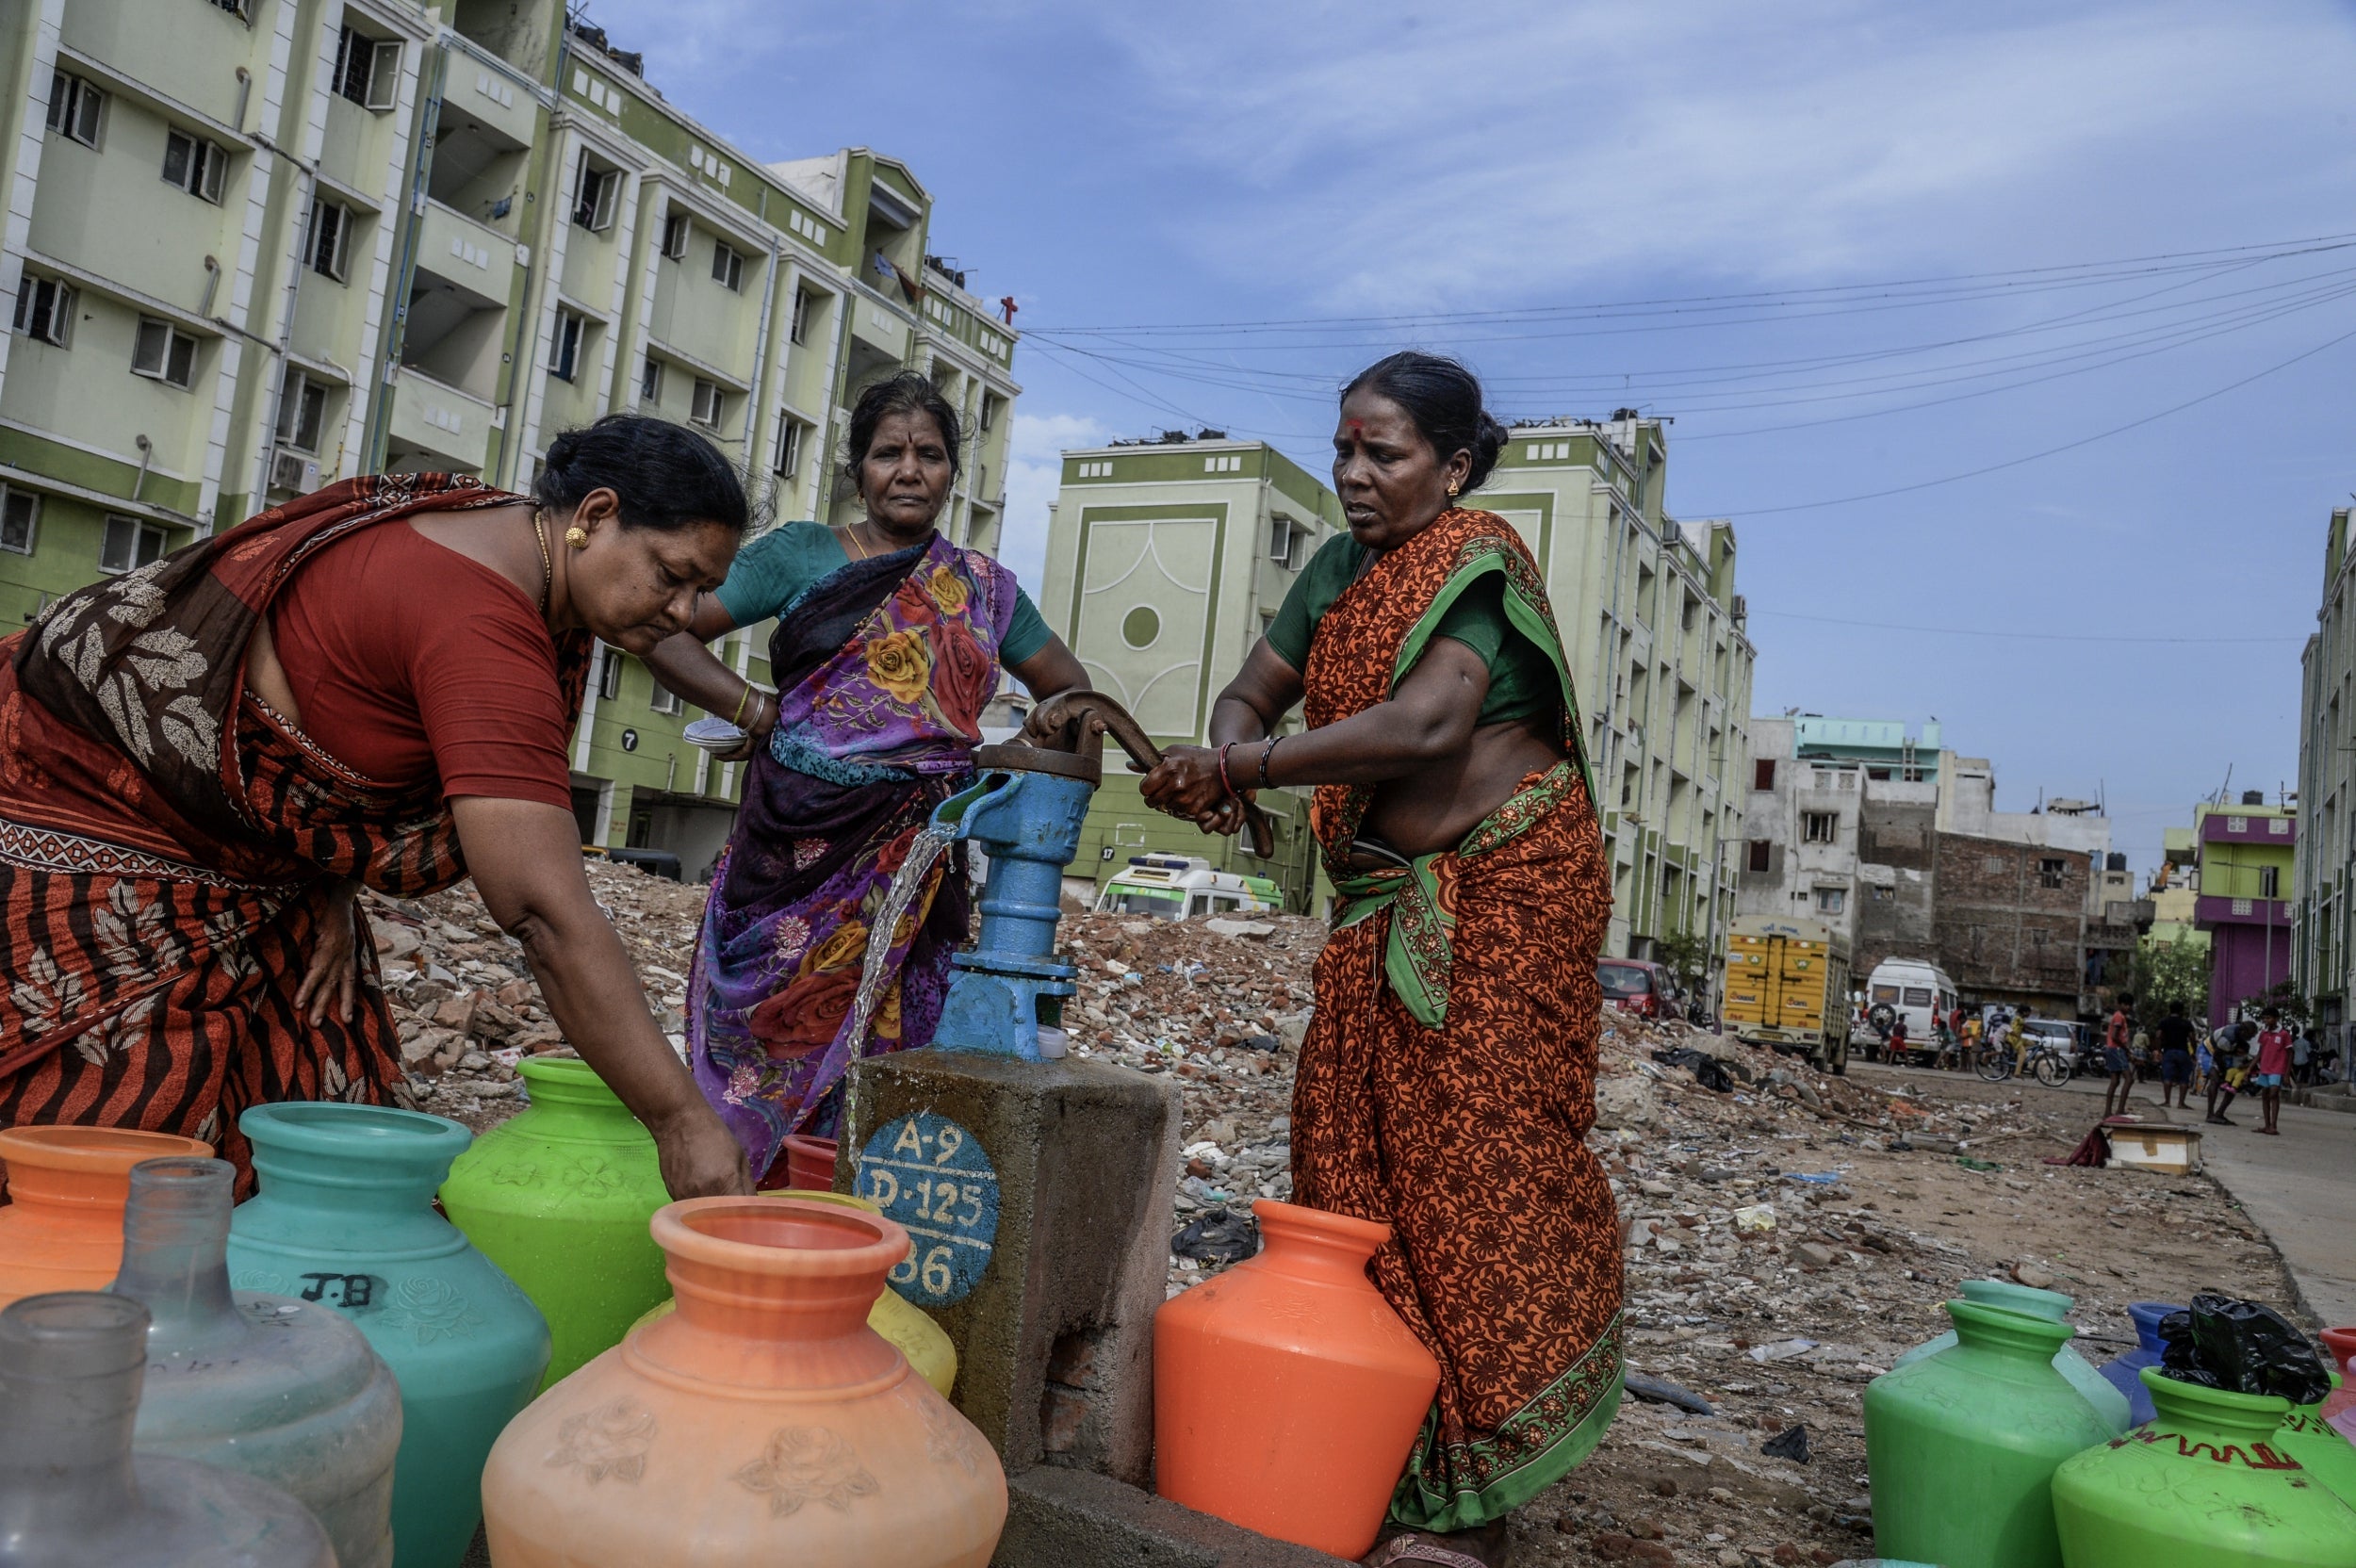 Residents of a housing complex in the city of Chennai fill water from a pump on 29 June